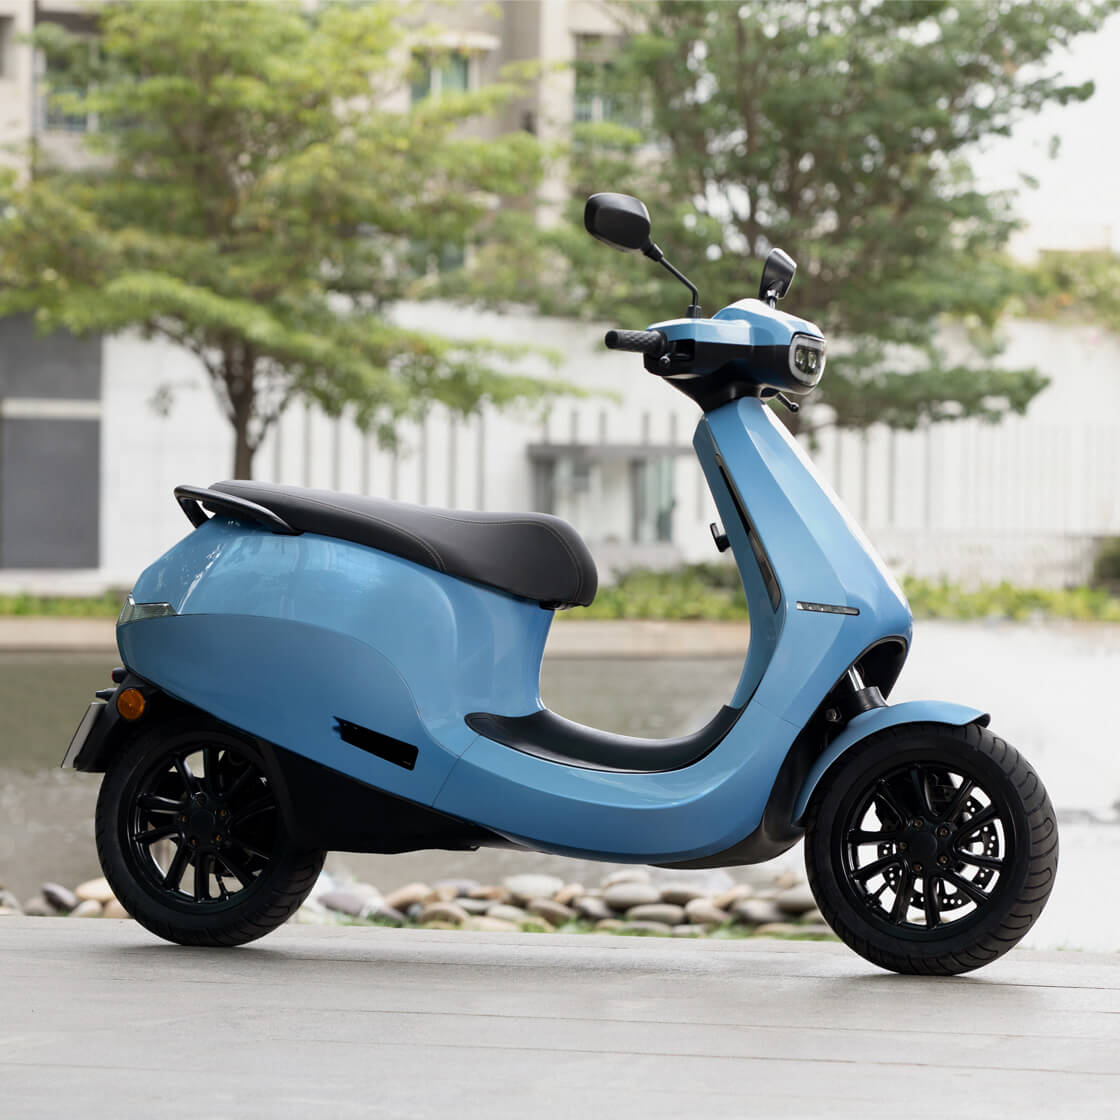 https://e-vehicleinfo.com/ola-electric-scooter-price-in-india-specification-highlights/